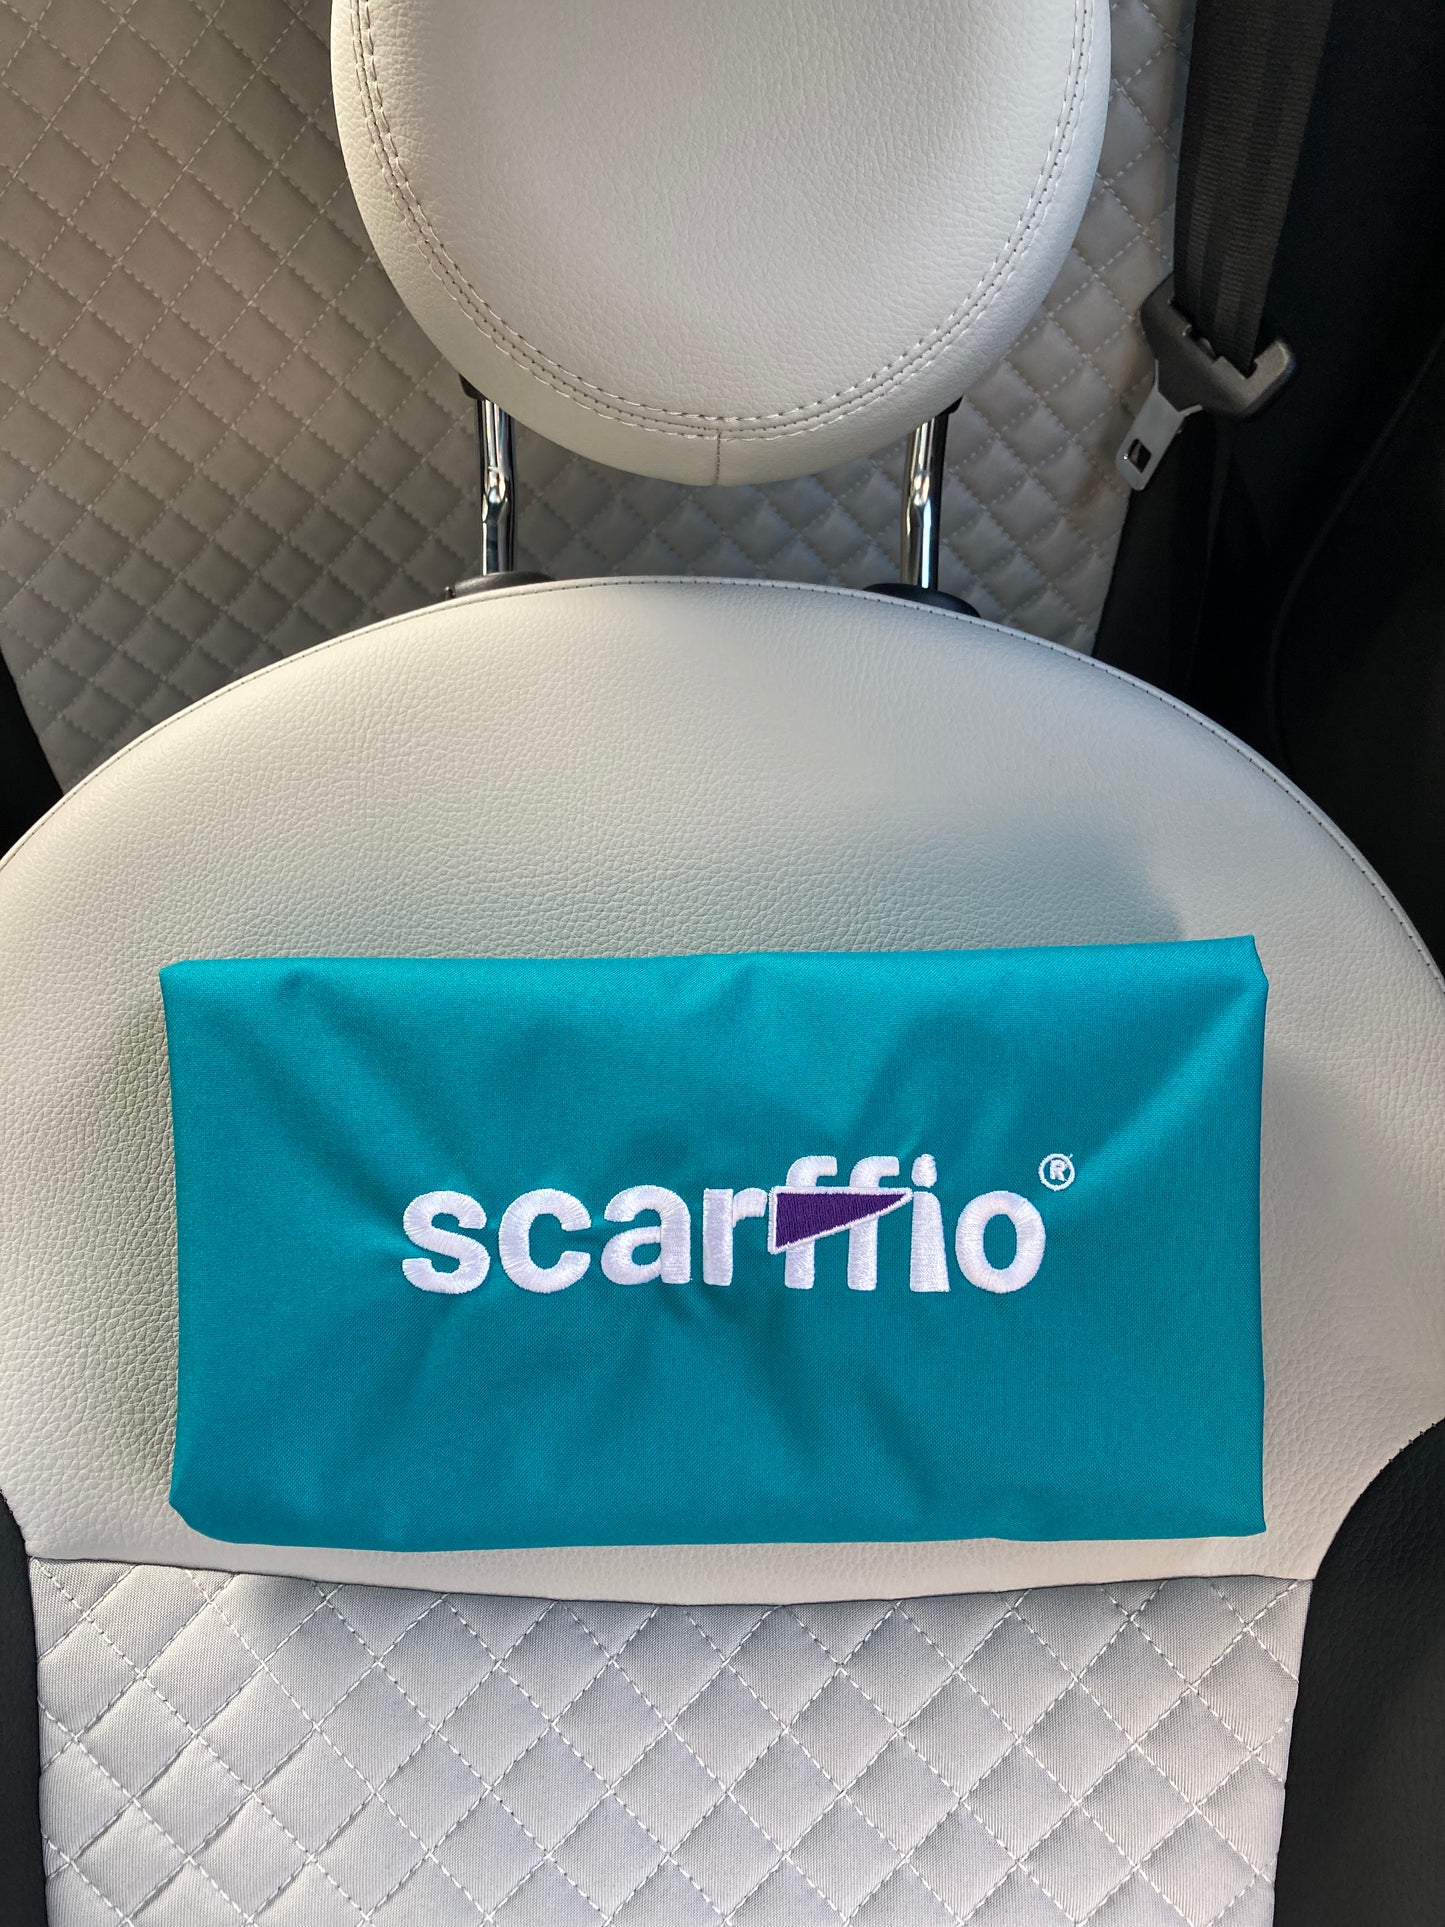 This image shows a a folded Hero scarffio®, resting on a cream and black quilted car seat. The focus of the image is  the white embroidered scarffio®  logo with its contrasting purple cape detail. 